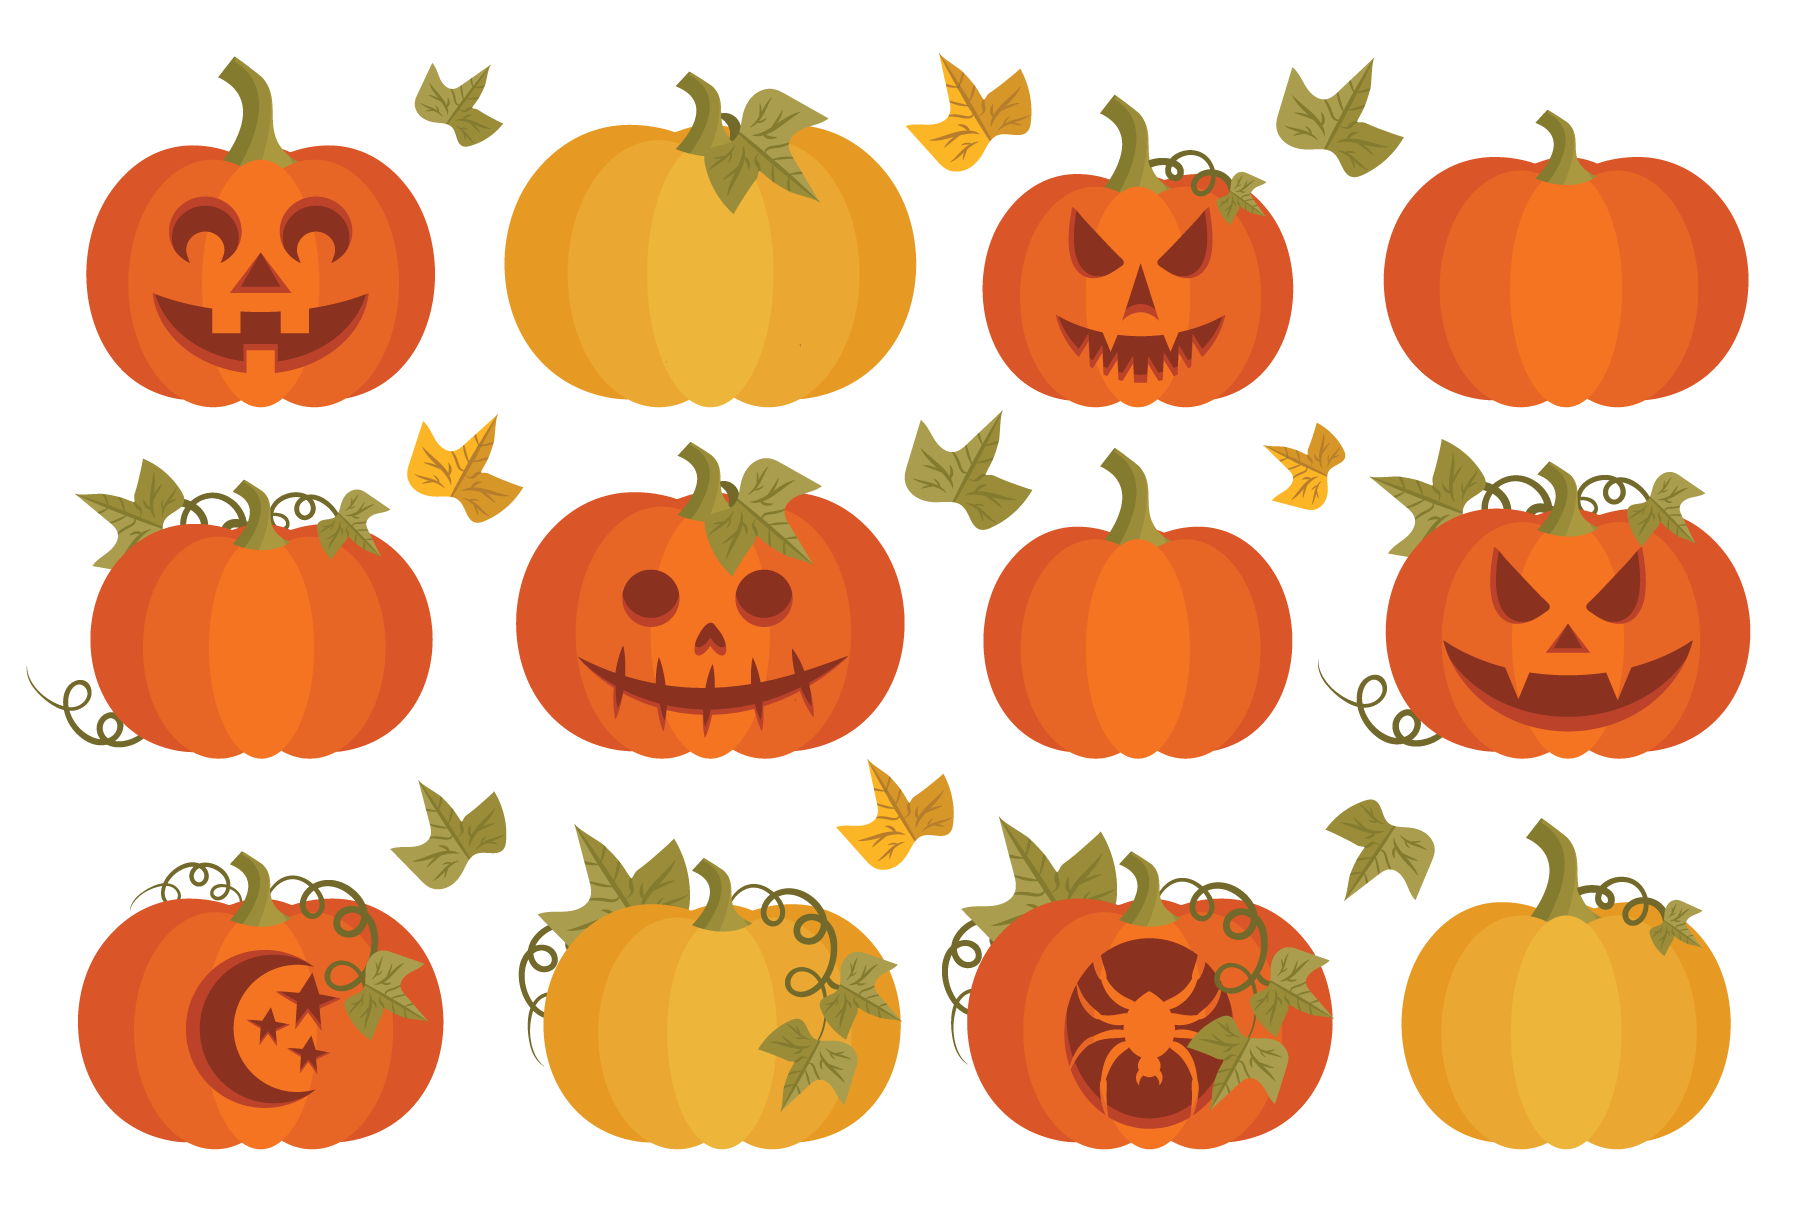 Fall Pumpkins Clip Art Set By Running With Foxes Thehungryjpeg Com